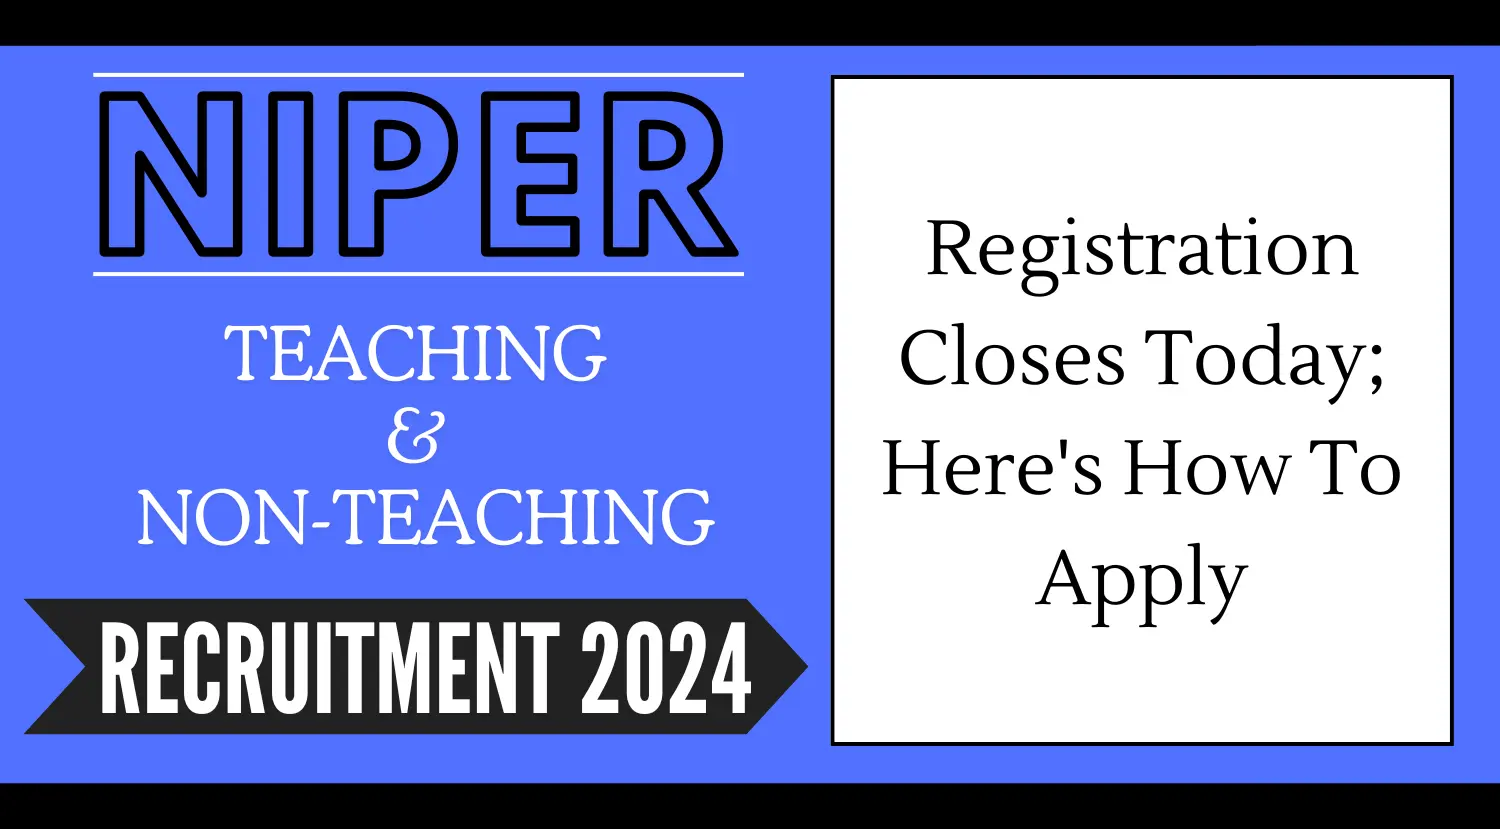 NIPER Teaching Non-Teaching Recruitment registration closes today heres how to apply